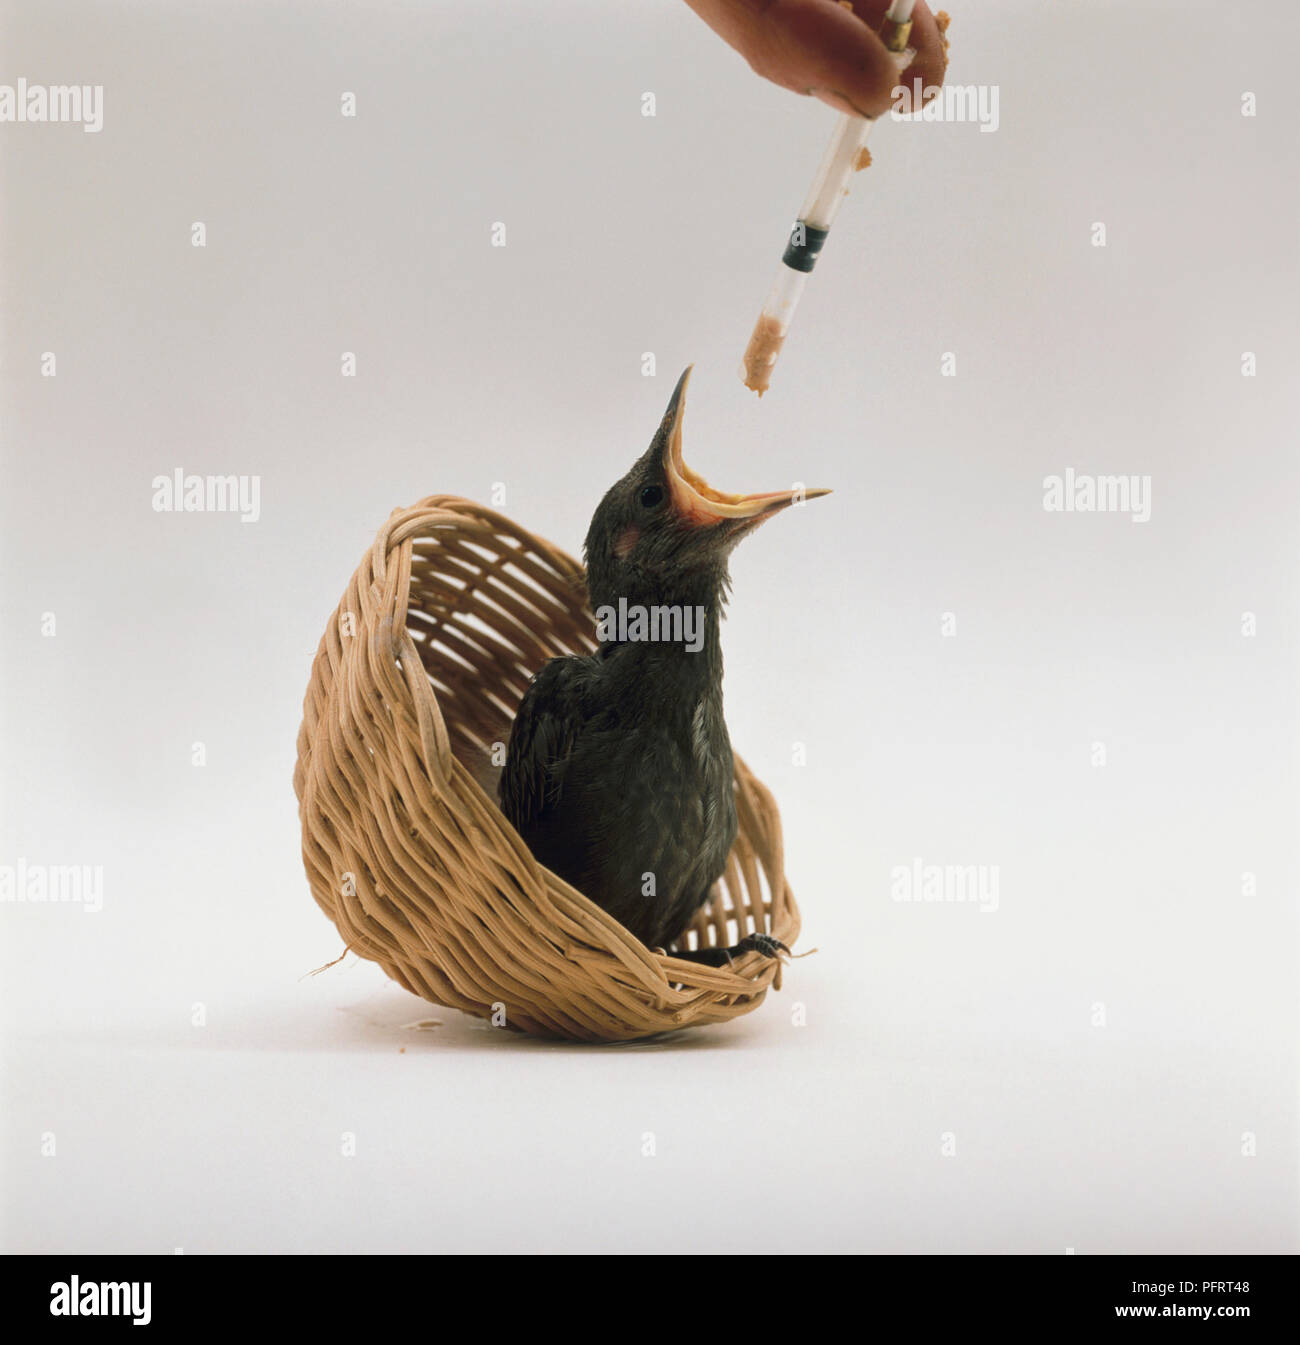 https://c8.alamy.com/comp/PFRT48/hand-rearing-young-starling-sturnus-vulgarise-sitting-in-small-wicker-basket-using-pipette-PFRT48.jpg